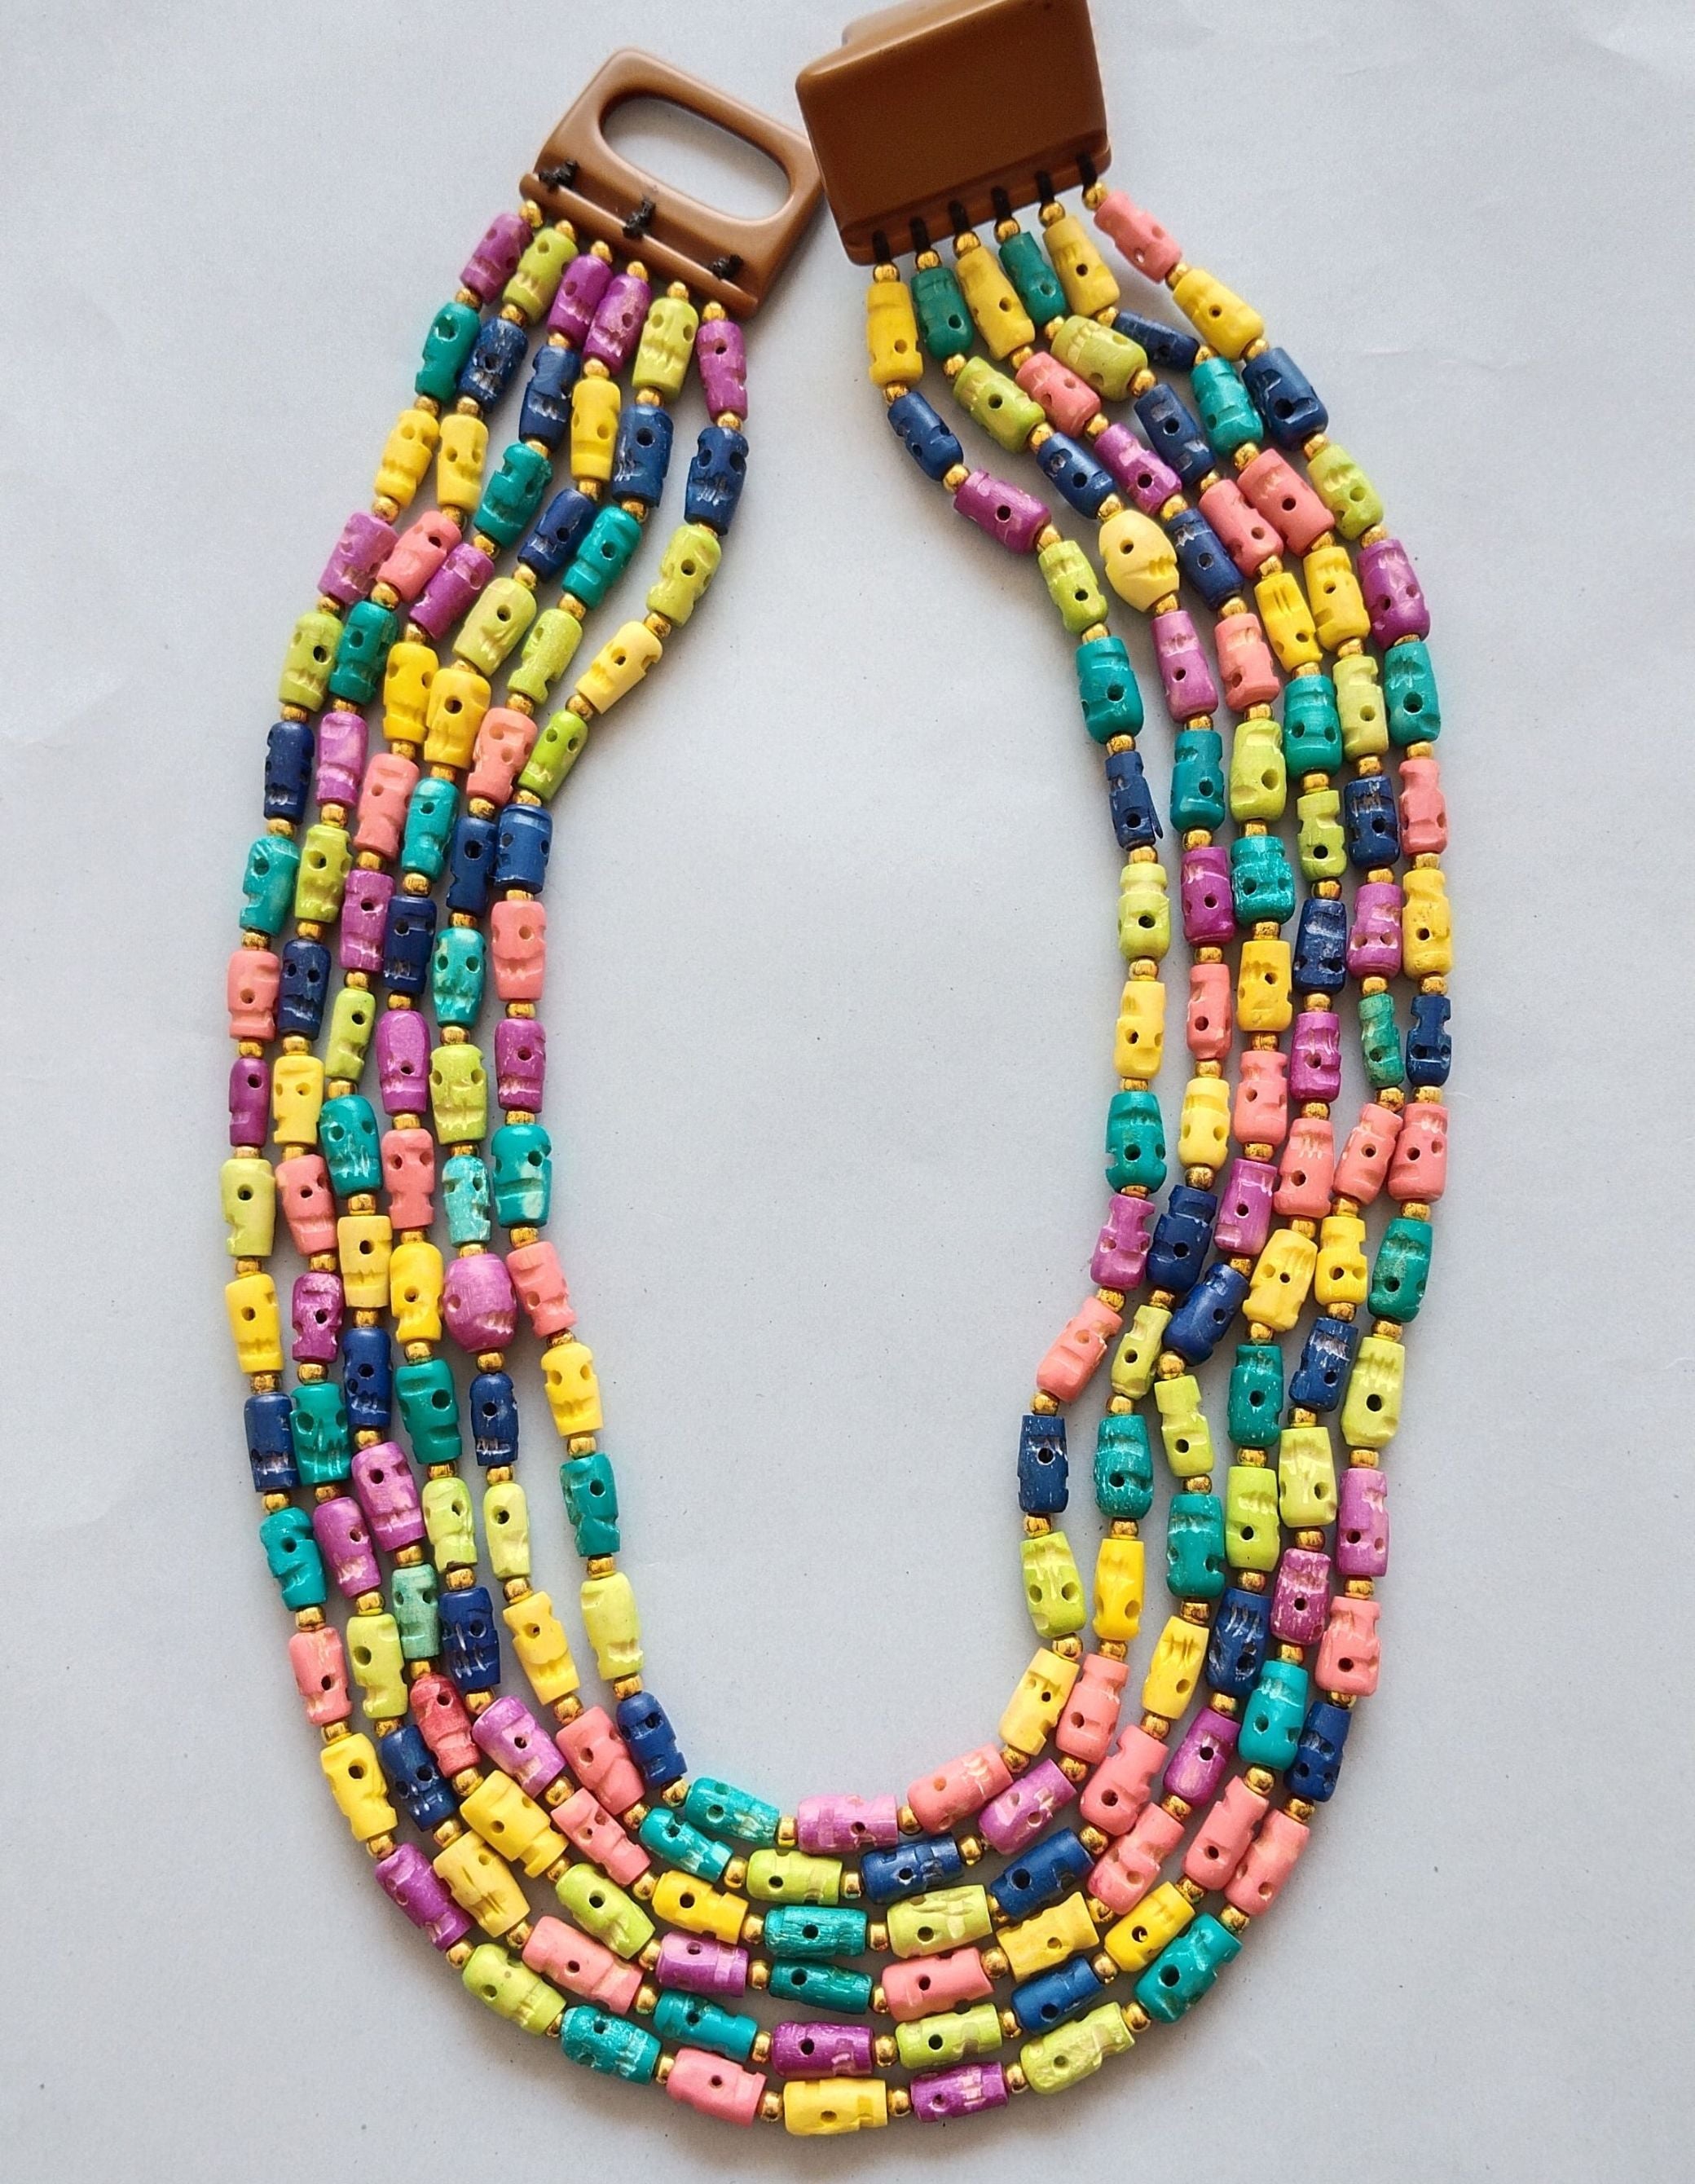 Amazon.com: Boho Rainbow Beaded Choker Necklace Beach Seed Beads Necklaces  for Women Teen Girls Multi Colorful Shell Pendant Bead Layered Neck Chain  Jewelry : Grocery & Gourmet Food